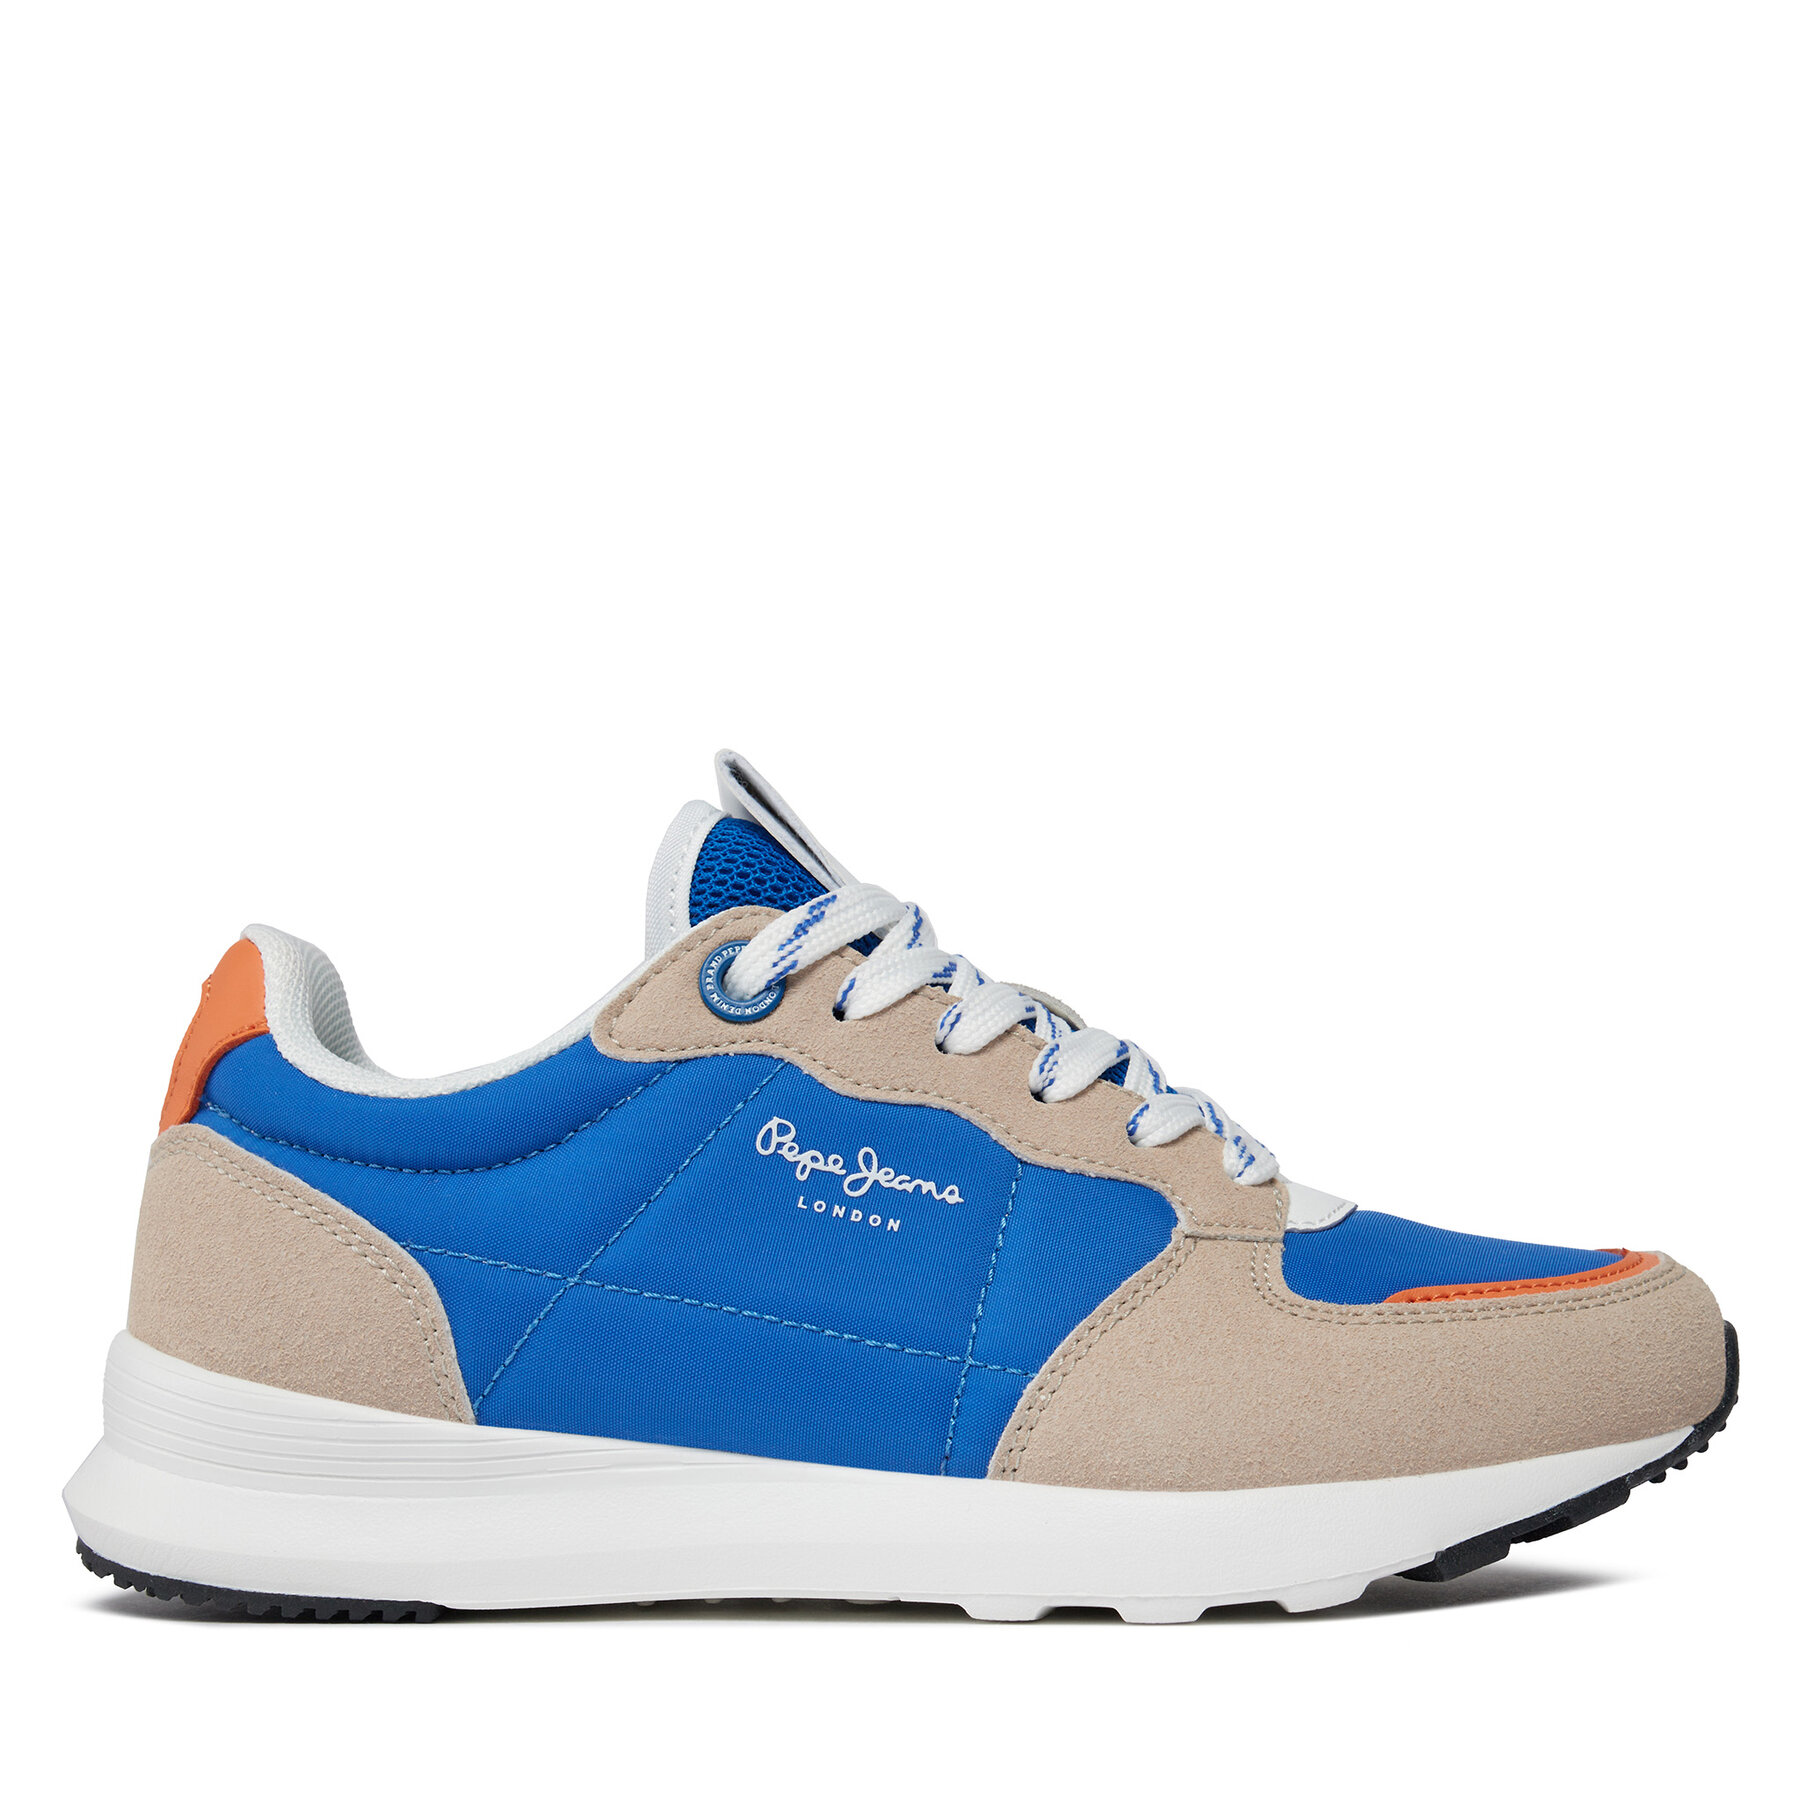 Sneakers Pepe Jeans York Mix B PBS30561 Beat Blue 549 von Pepe Jeans